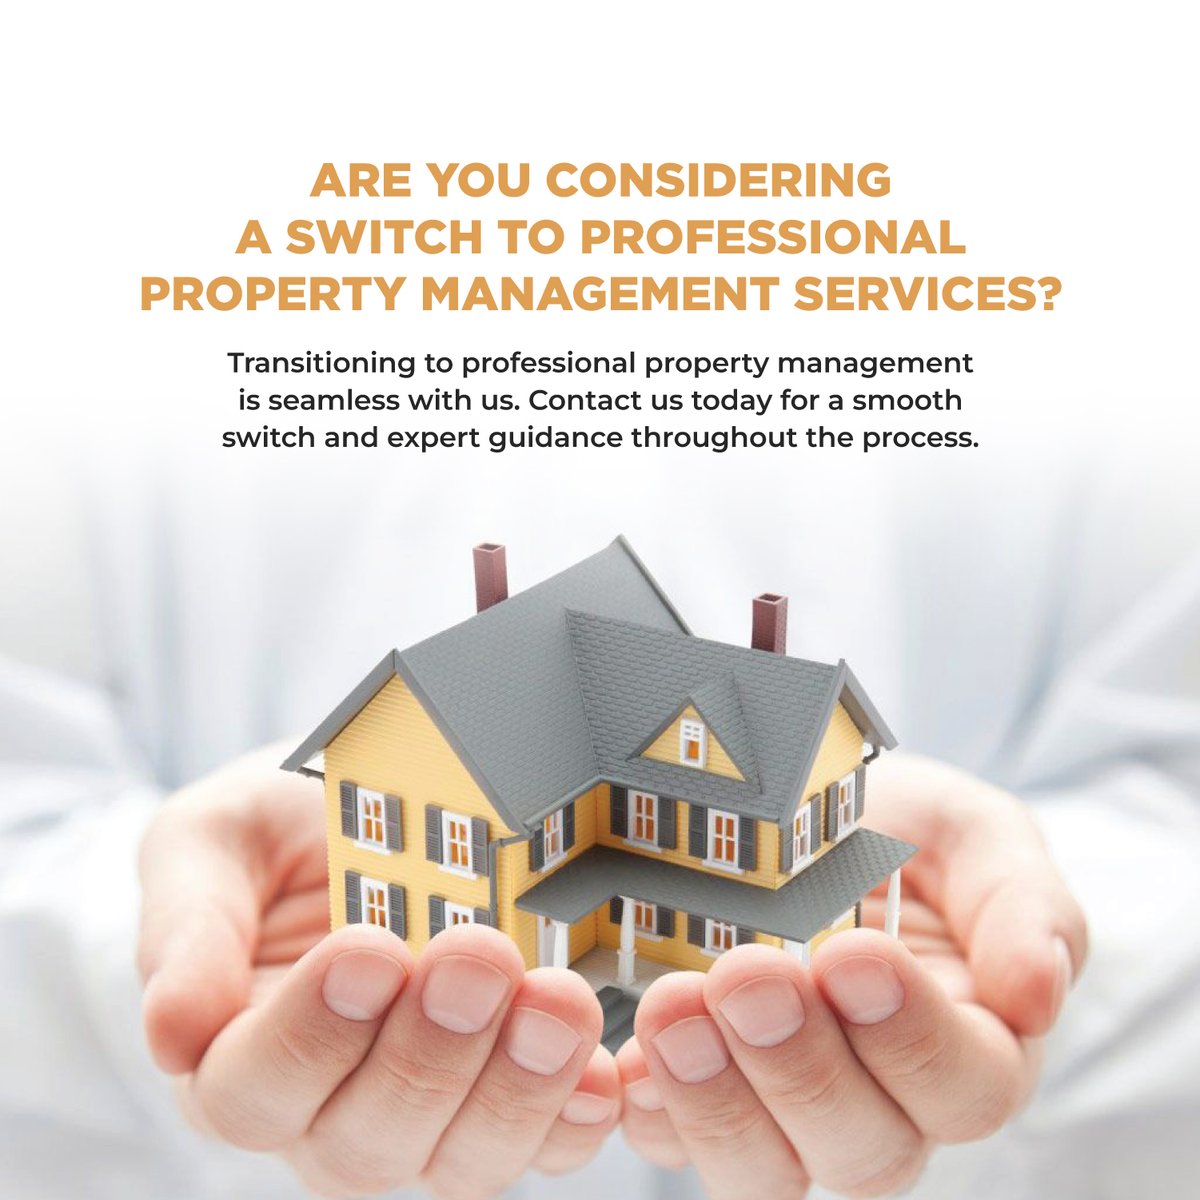 Ready to upgrade to professional property management? Seamlessly transition with us for expert guidance and a hassle-free switch. 

🔗 estateagentsbeckton.co.uk/property-manag…

#PropertyManagement #ProfessionalServices #SmoothTransition #ExpertGuidance #RealEstateManagement #EstateAgentsBeckton